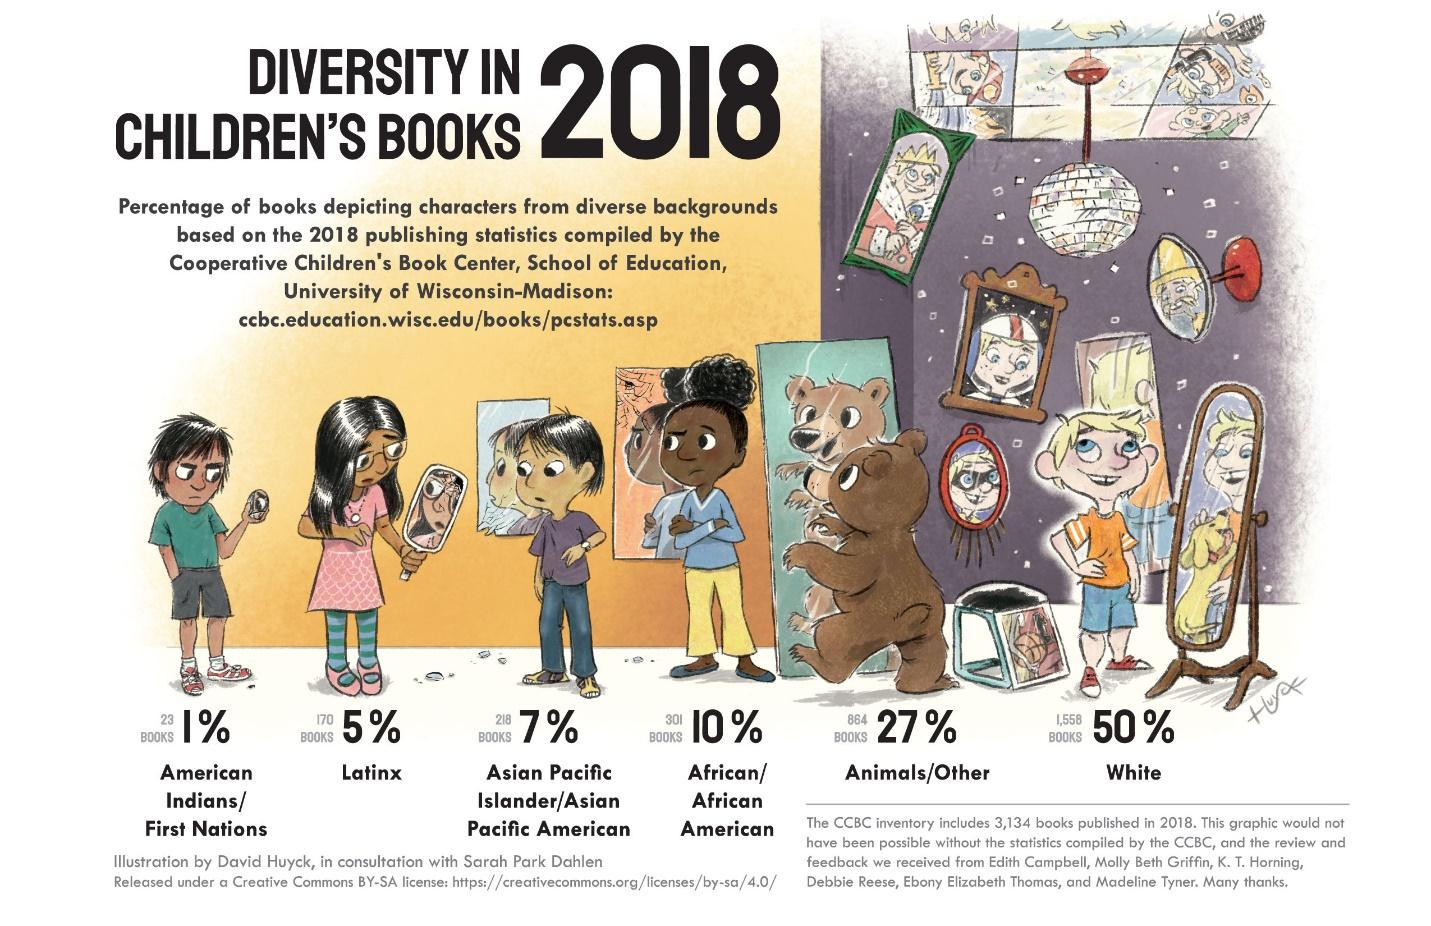 A graphic showing diversity in children's book in 2018. Five children, all of different ethnic backgrounds, are looking in mirrors sized propotionately the to the amount of books that feature characters of their same background. A bear is also looking in a mirror, showing that 27% of characters are animals/other. 1% of characters are American Indian/First Nations, 5% Latinx, 7% Asian Pacific Islander/Asian Pacific American, 10% African/African American, and 50% white.